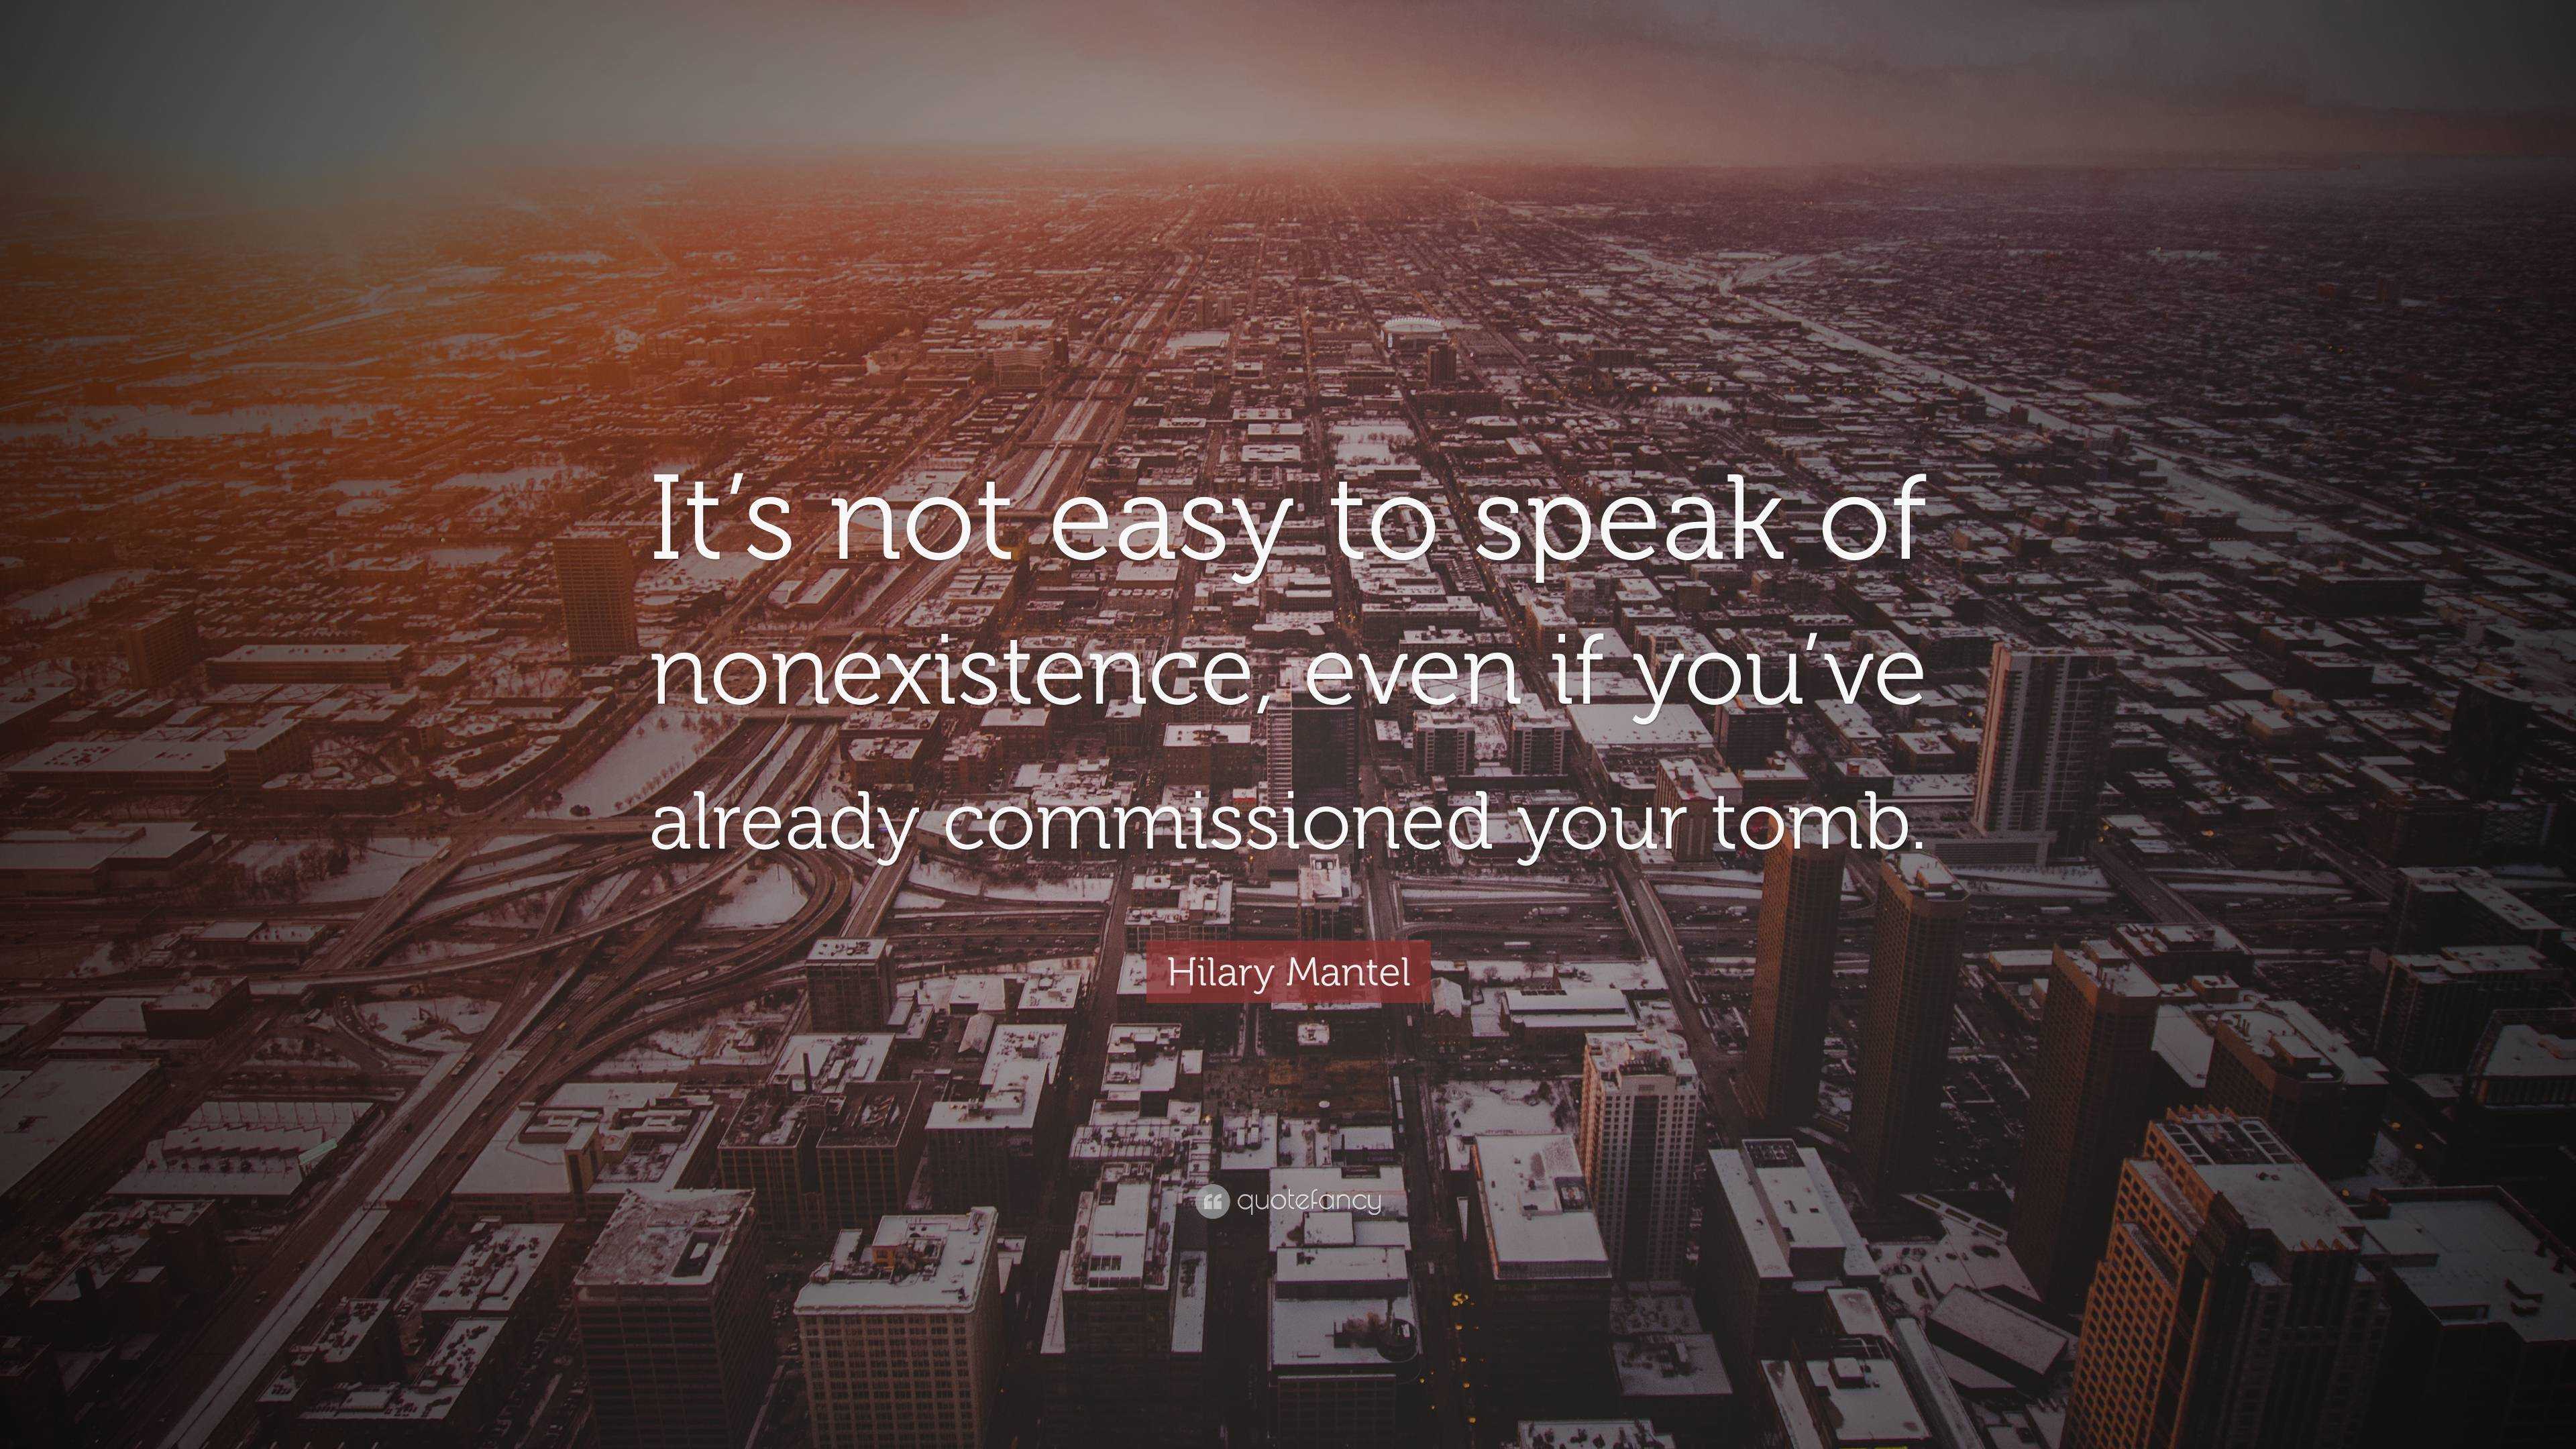 Hilary Mantel Quote: “It’s not easy to speak of nonexistence, even if ...